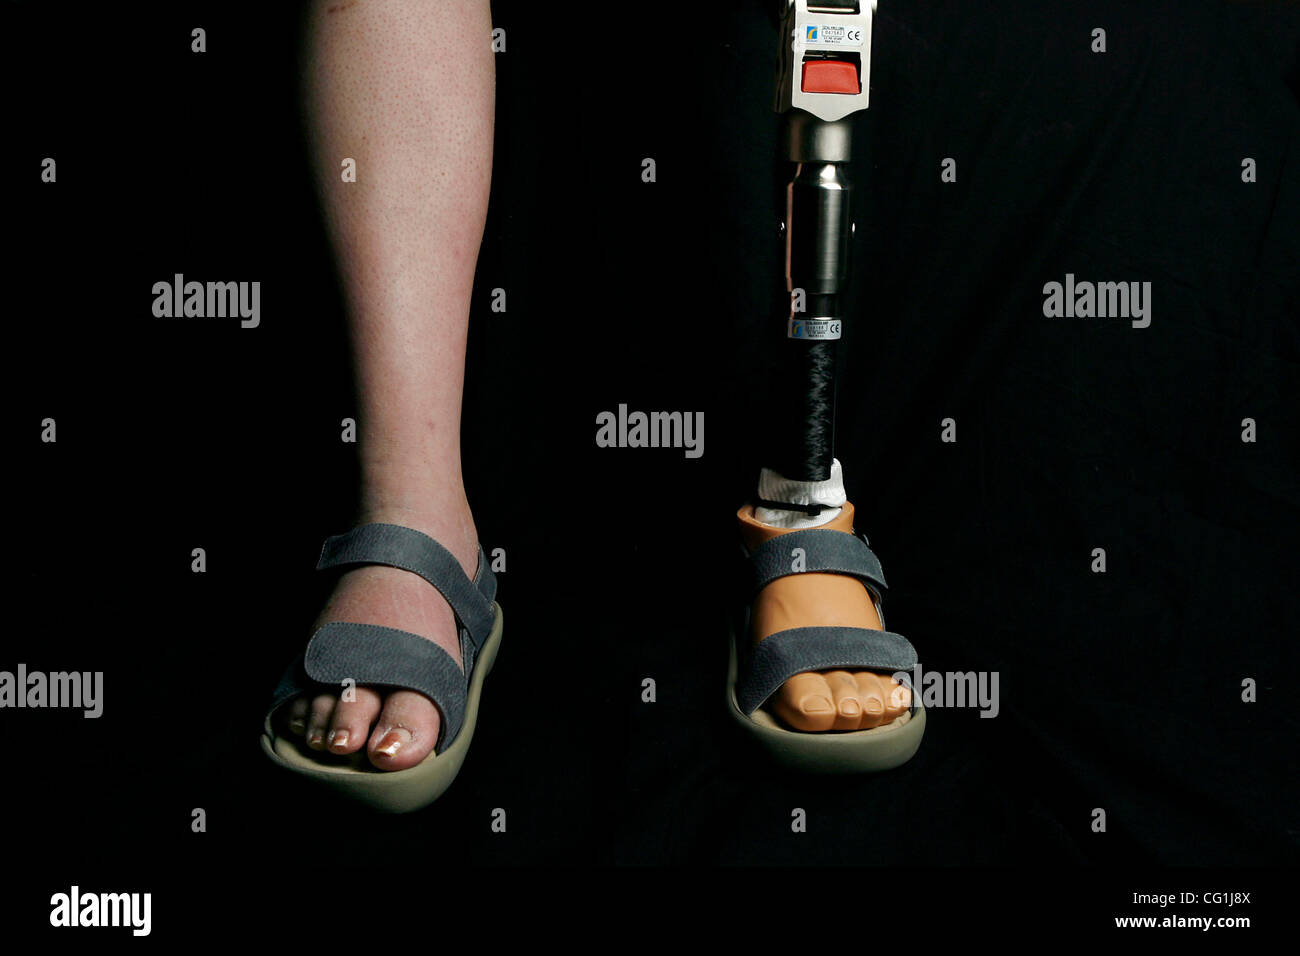 Aug 17, 2007 - Lake Worth, FL, USA - Closeup of leg amputee - this is Elissa Wehner who suffers from Diabetes. (Credit Image: © J. Gwendolynne Berry/Palm Beach Post/ZUMA Press) RESTRICTIONS: USA Tabloid RIGHTS OUT! Stock Photo